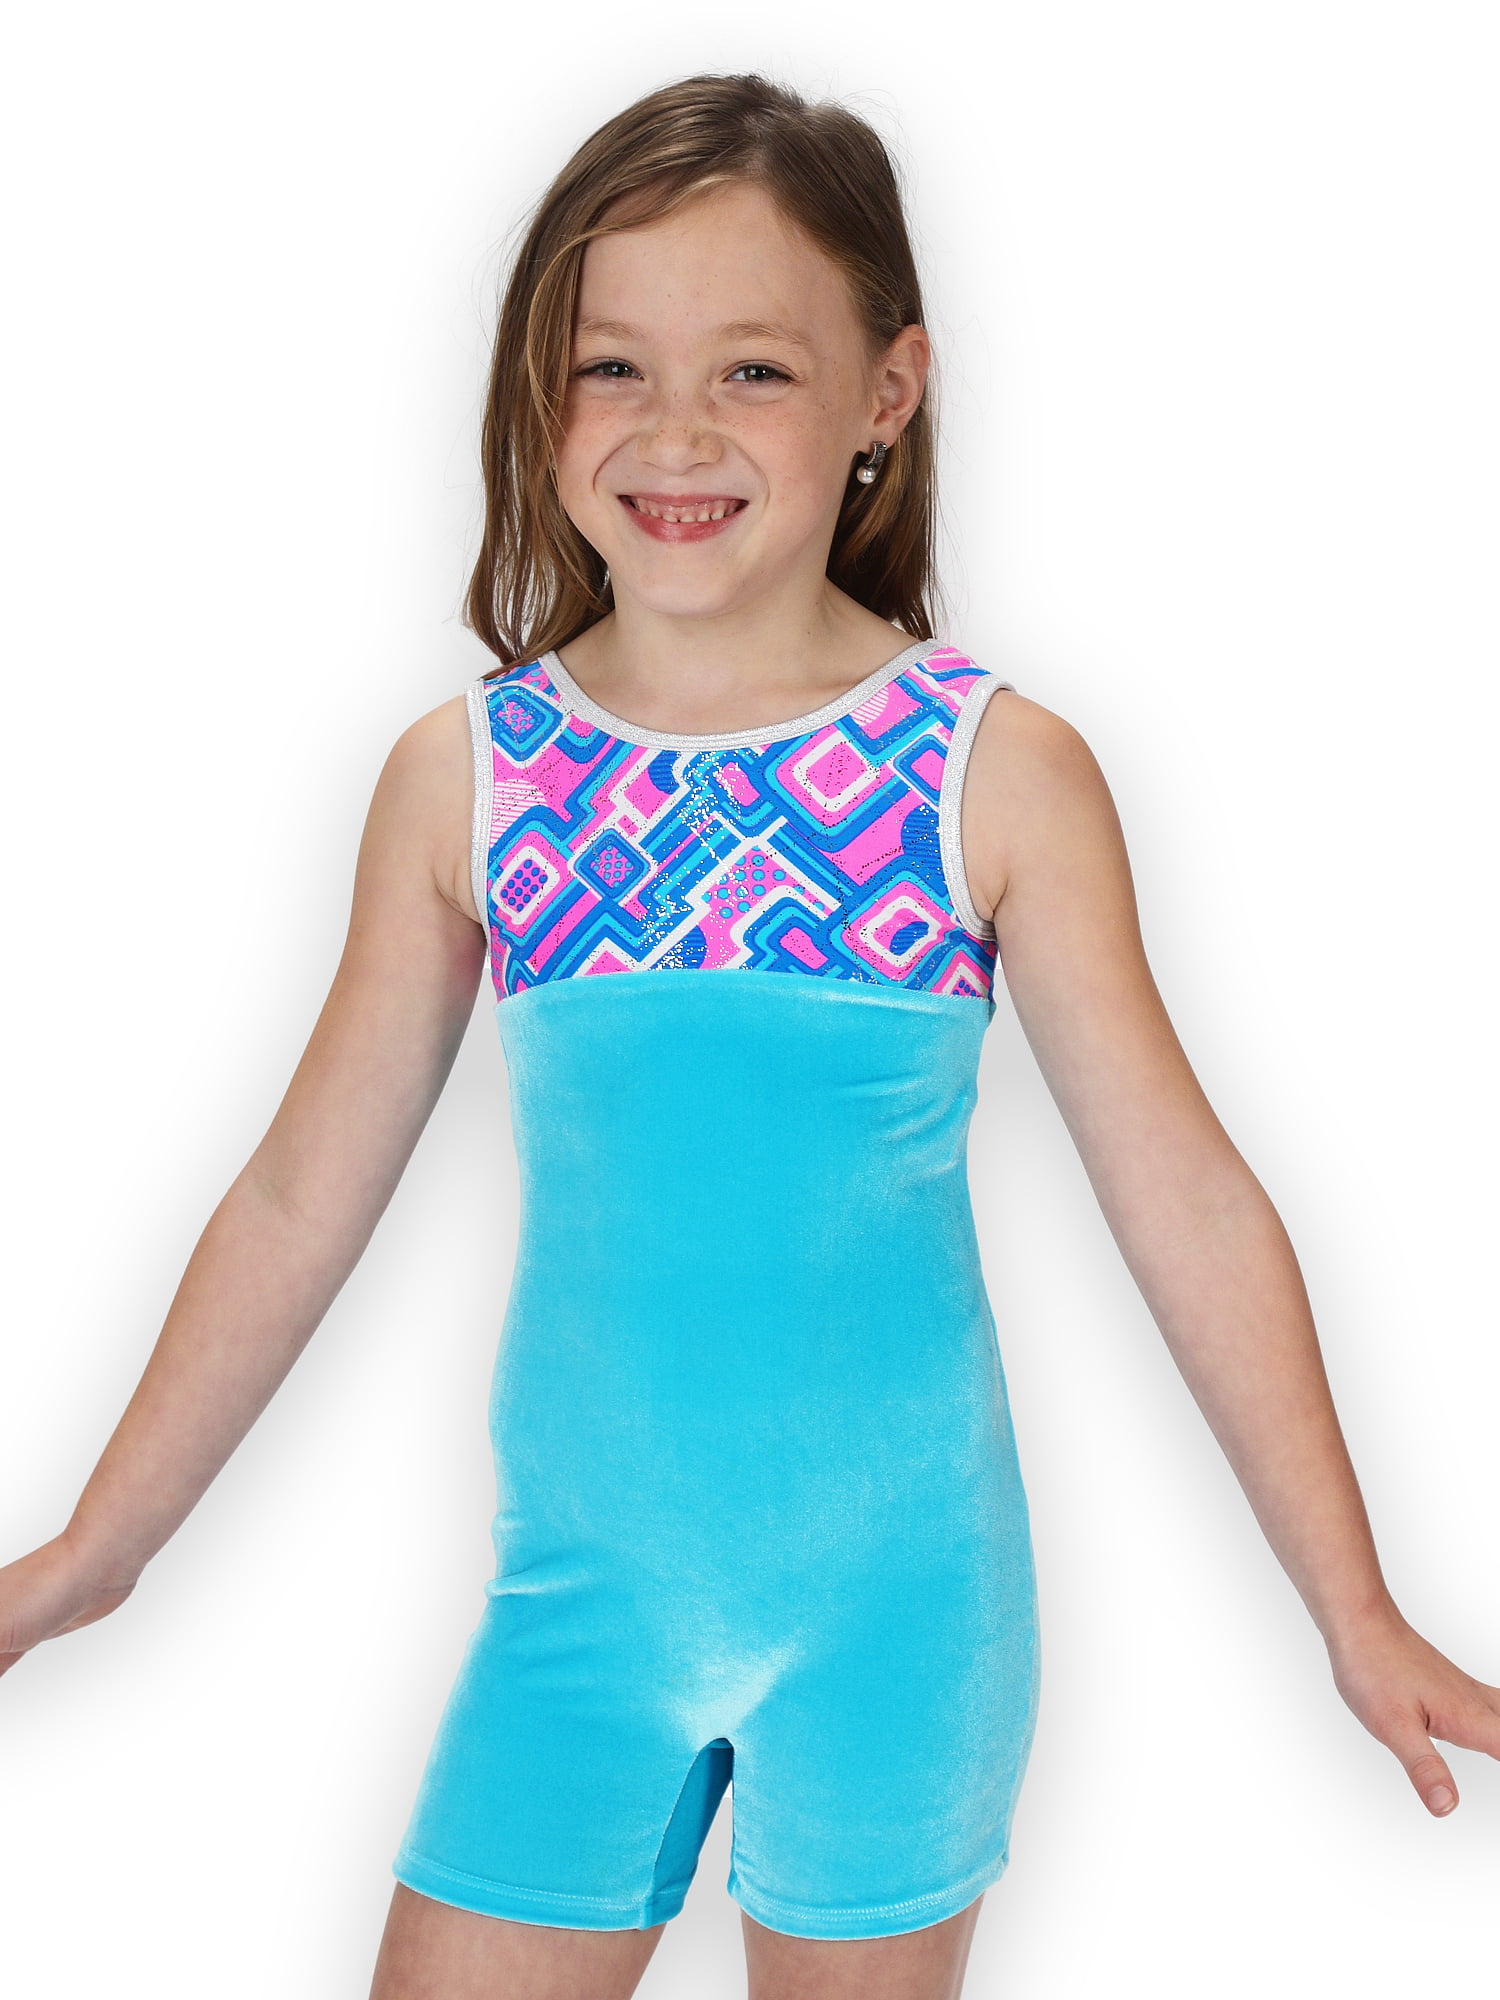 Teal Blue and Green Collection Leap Gear Gymnastics Biketard/Unitard for Girls Turquoise